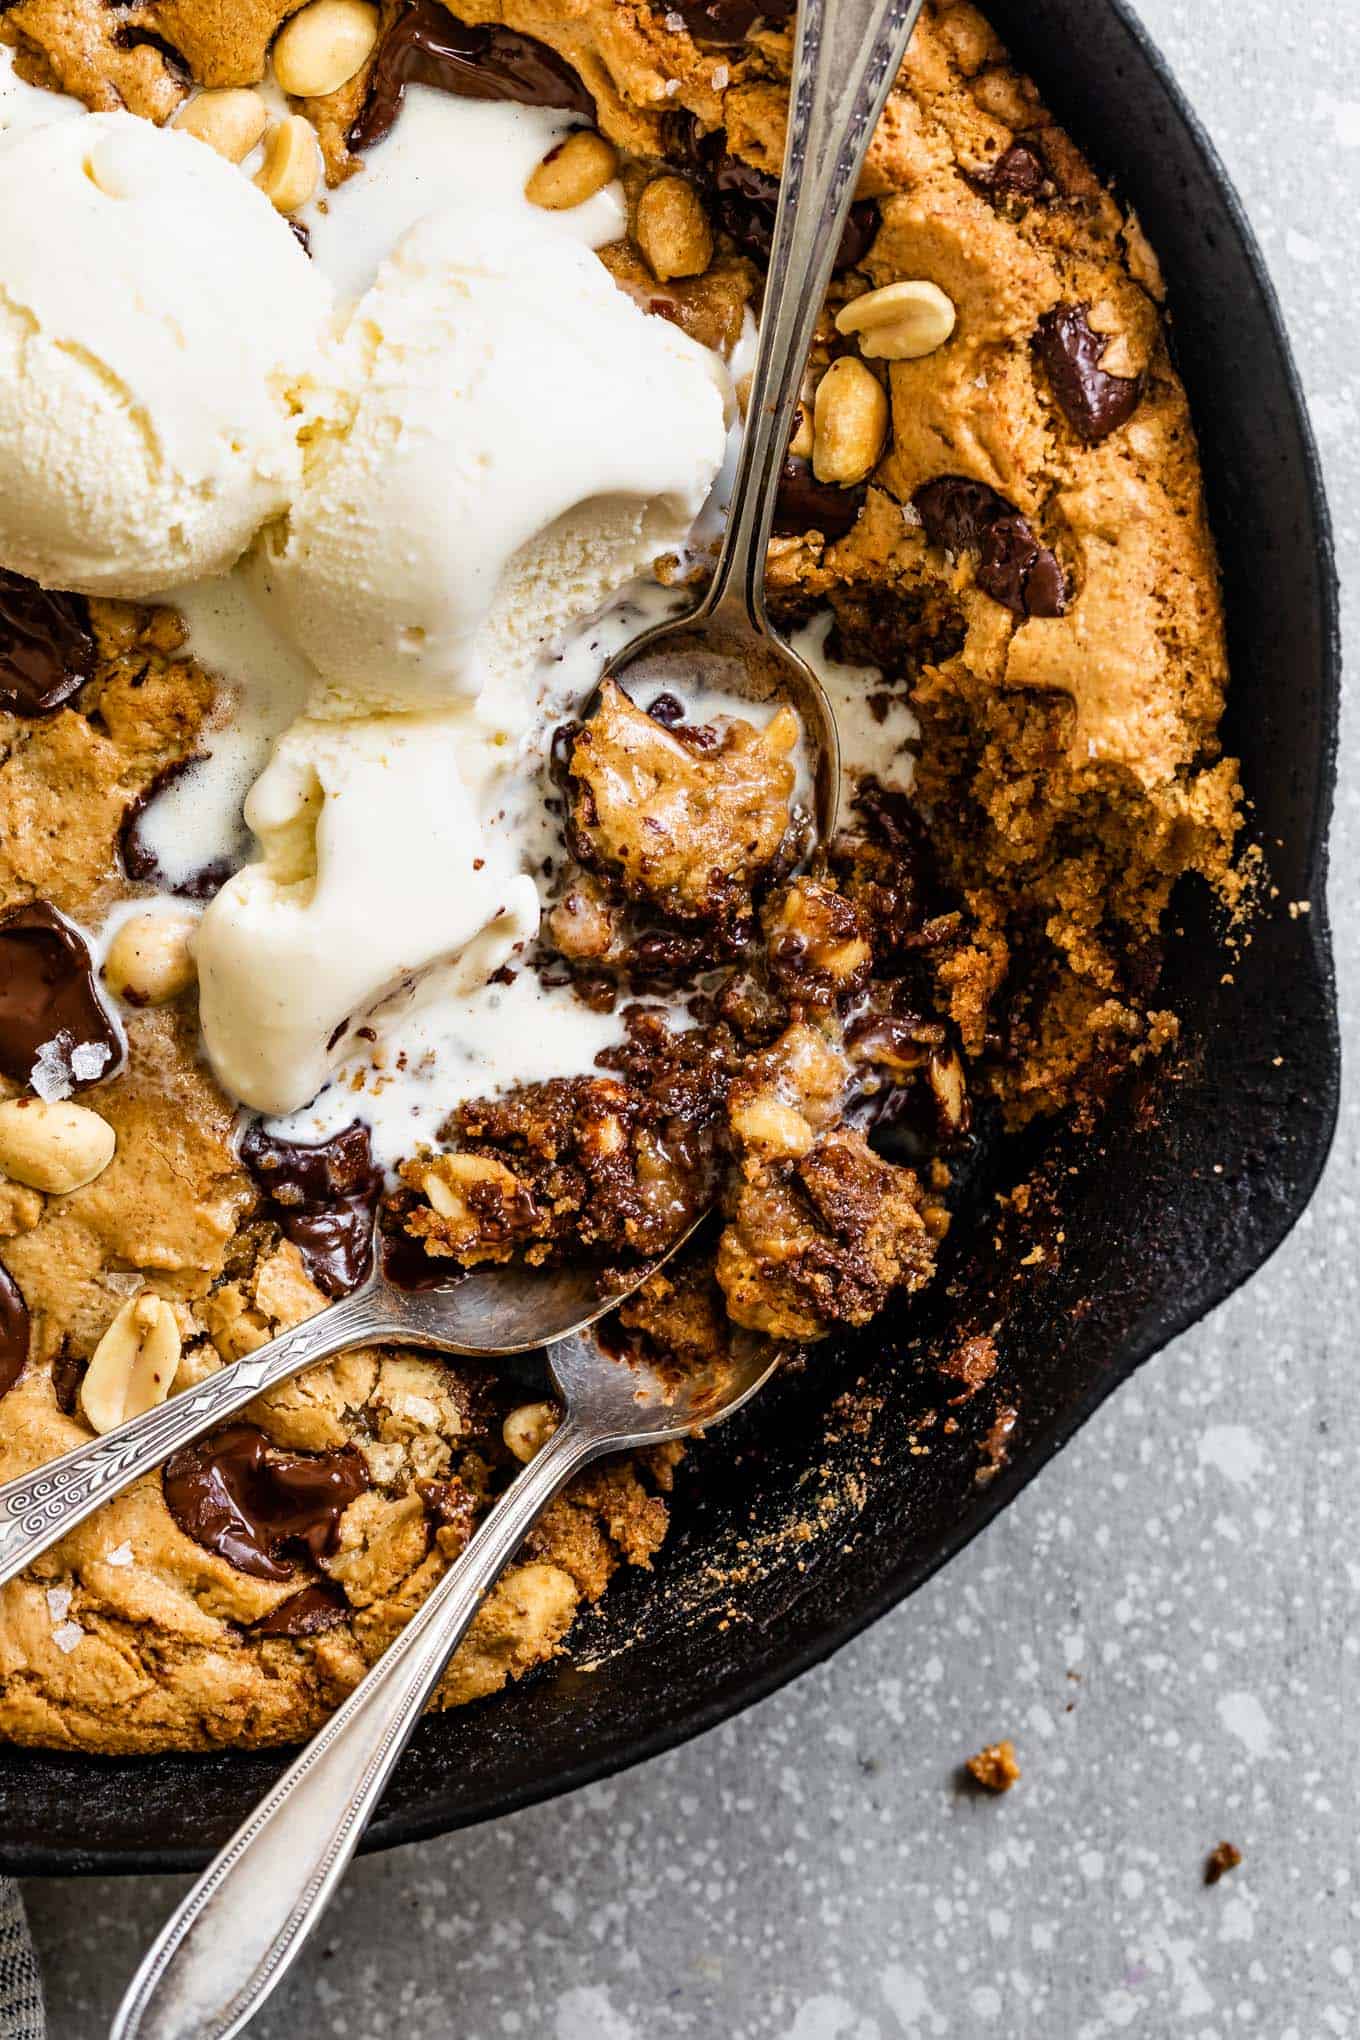 Spoonfuls of Gluten-Free Chocolate Chip Skillet Cookie